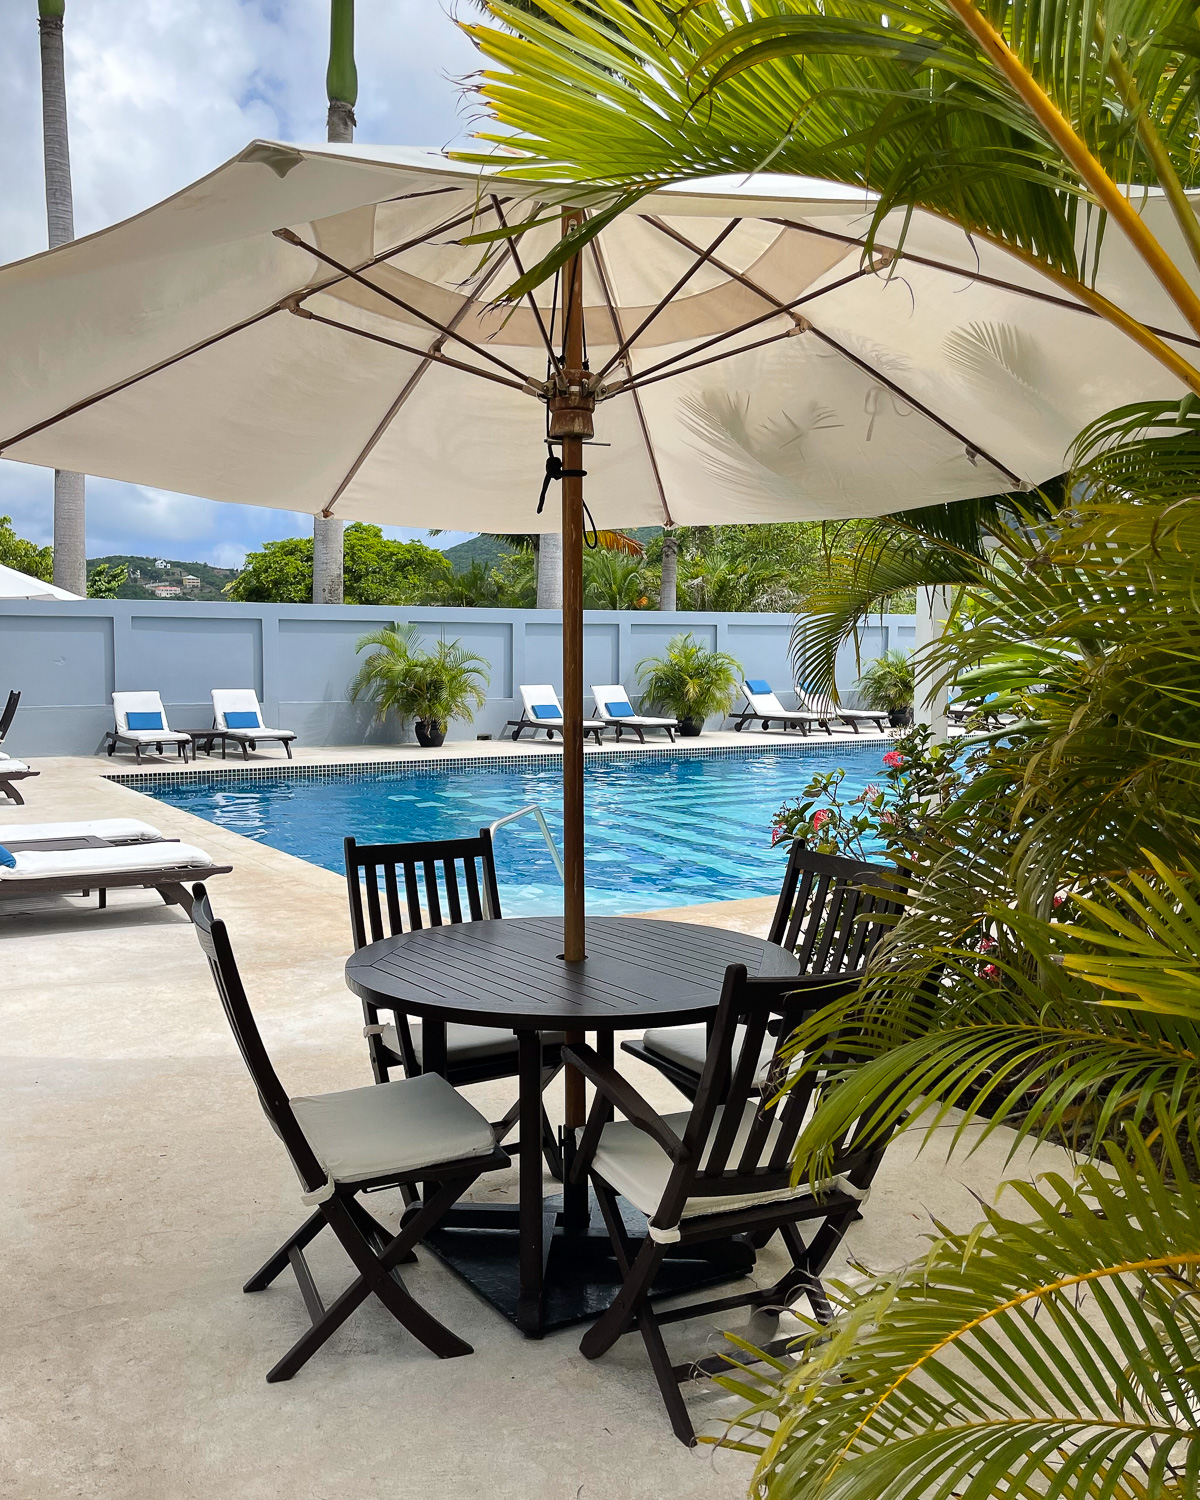 Pool at Montpelier Plantation and beach in Nevis Photo Heatheronhertravels.com